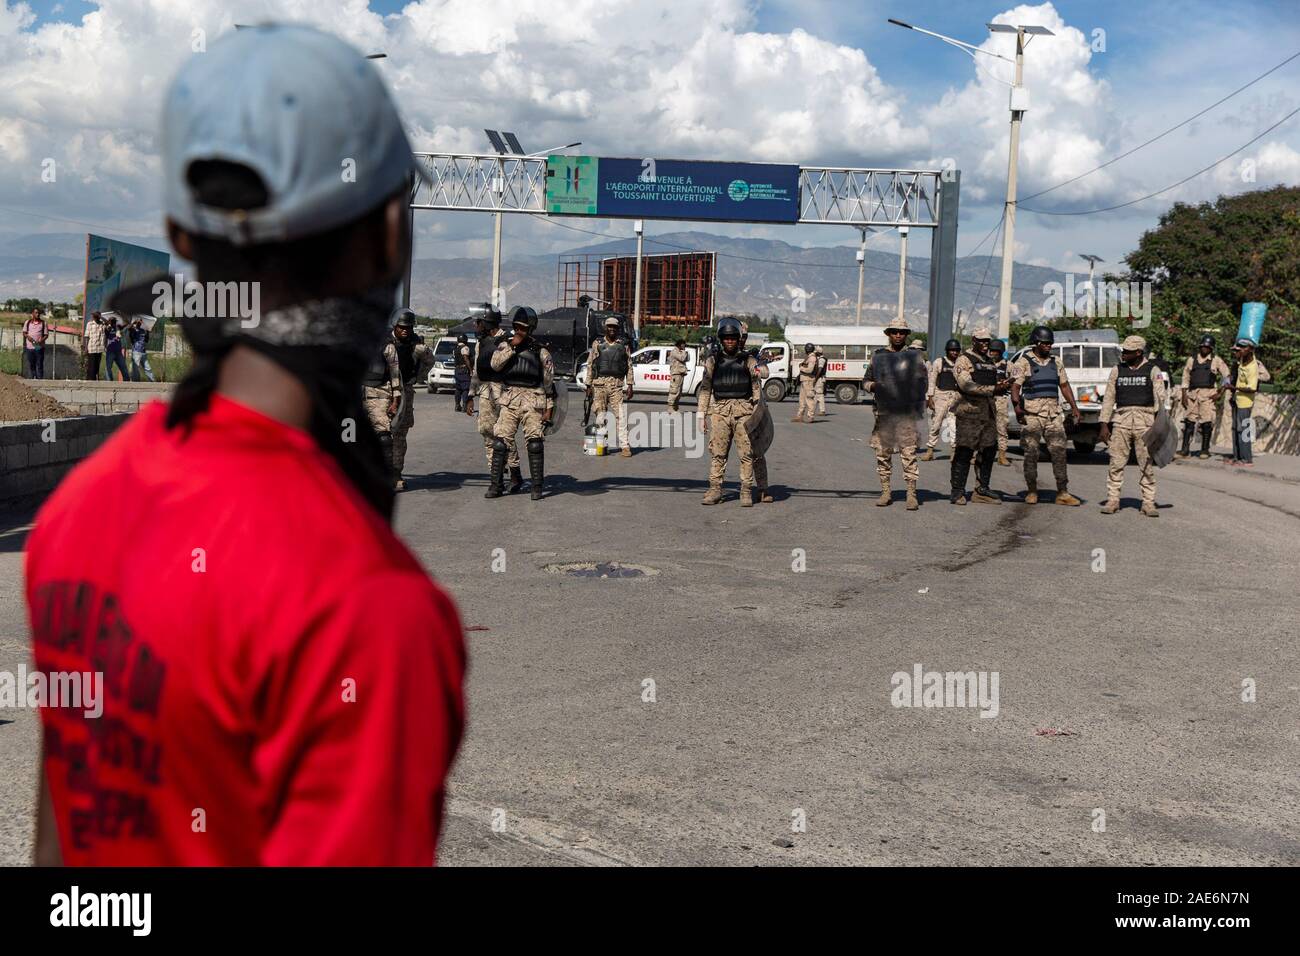 Port Au Prince, Haiti. 06th Dec, 2019. Police officers blockade the entrance to Toussaint Loverture Airport during the protest.For over a year tensions has been high in Haiti, widespread governmental corruption and the misuse of Venezuelan loans through the Petro Caribe program has led many people to take to the streets demanding that President Jovenel Moïse steps down. Country wide protests and the threat of violence has brought the nation to a near standstill with many businesses and schools have now been shuttered for months. With both sides digging in there seems no end in sight. Credit: S Stock Photo